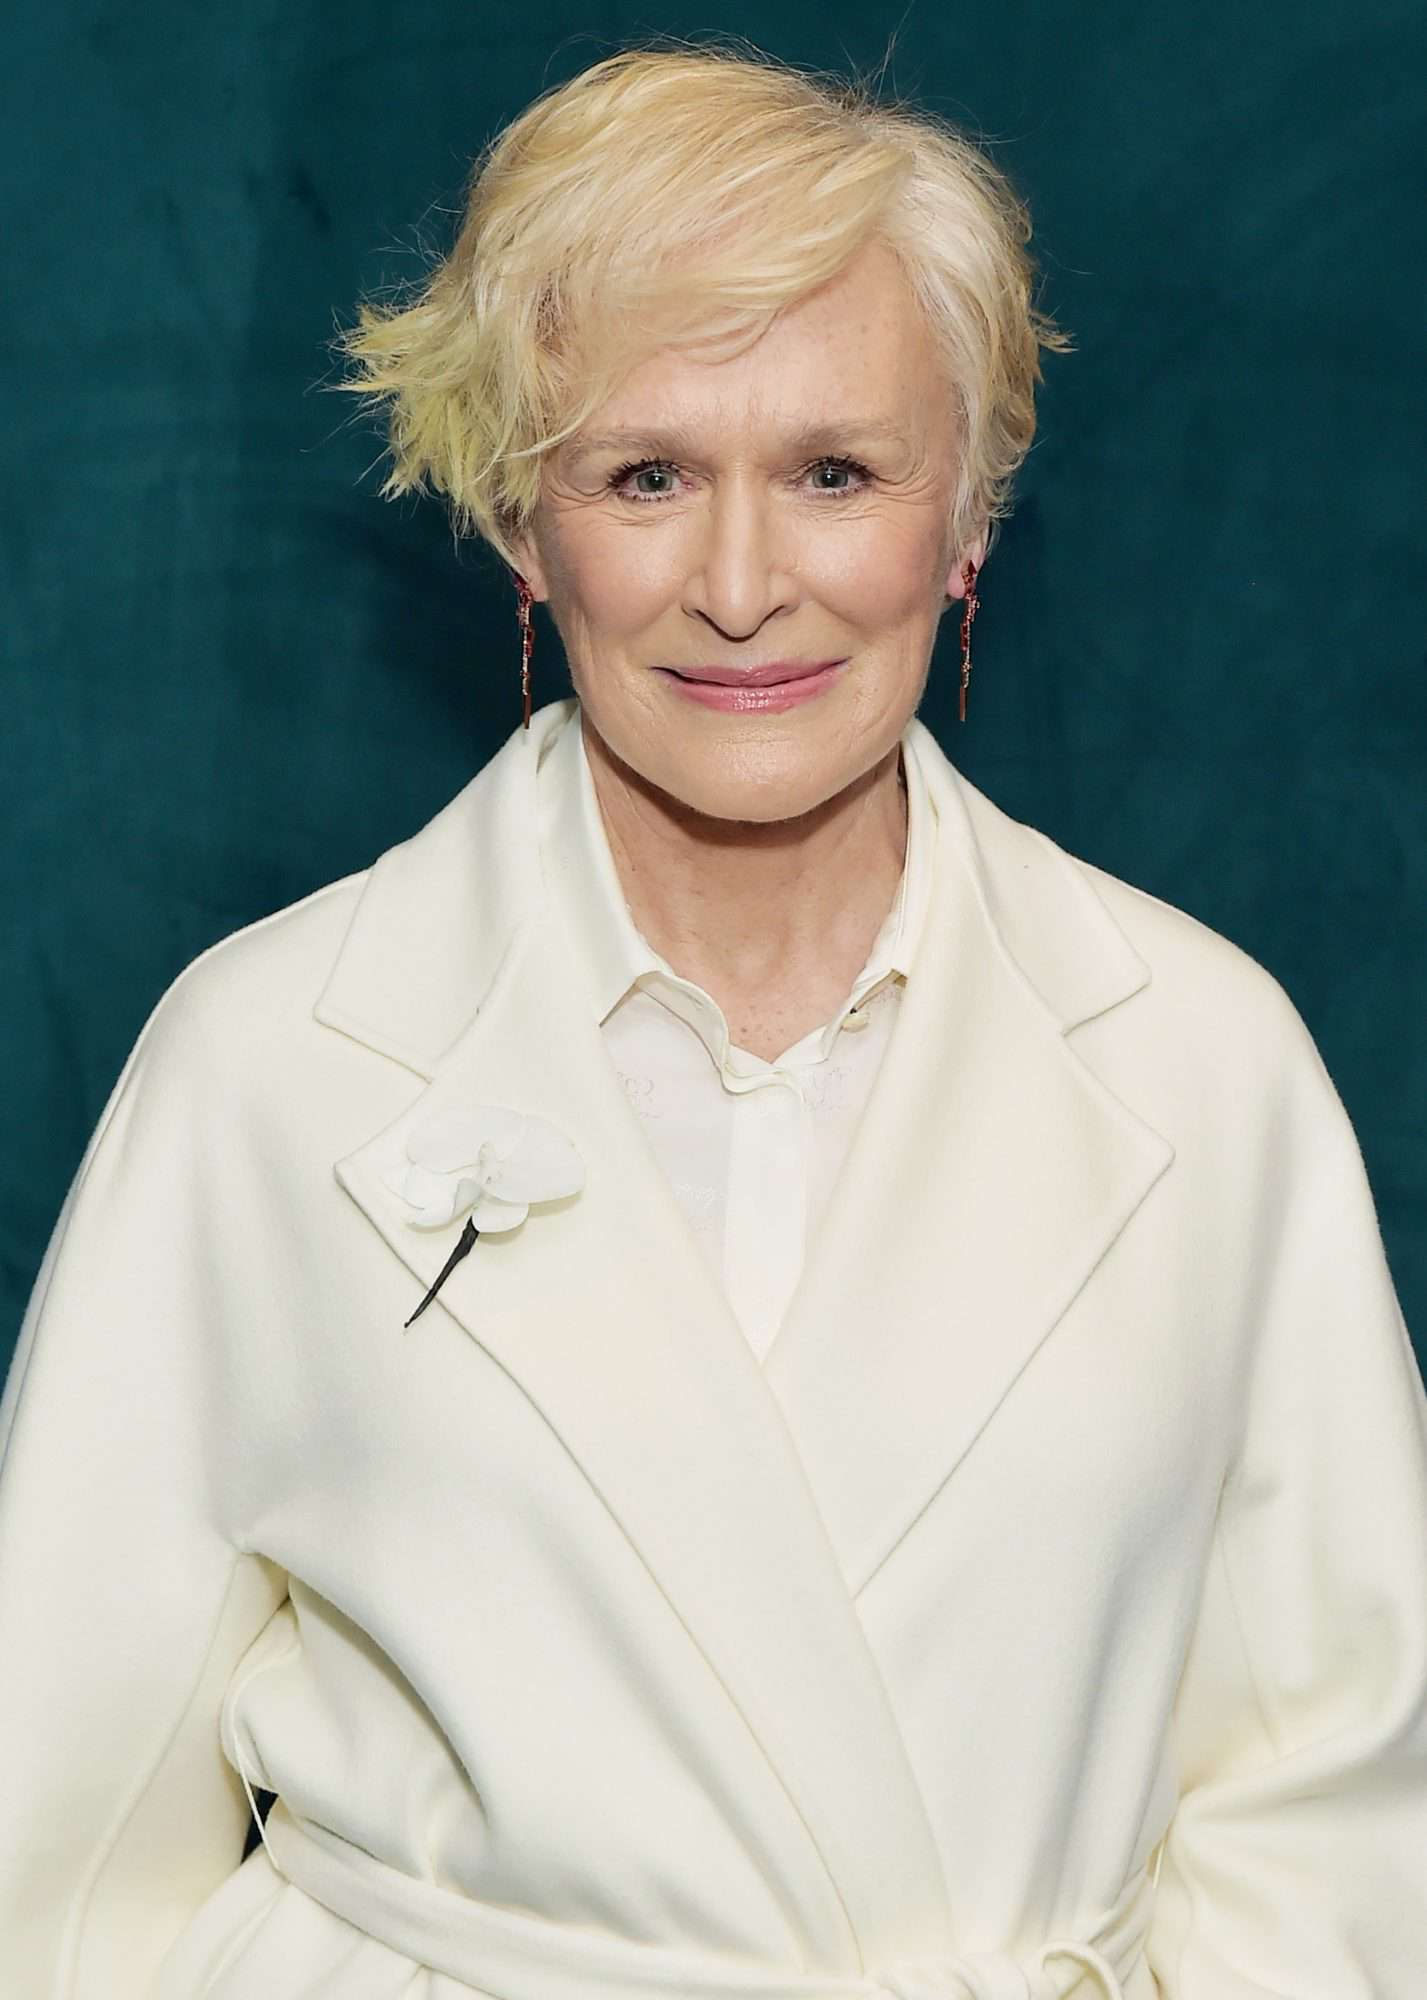 Glenn Close attends 12th Annual Women in Film Oscar Nominees Party Presented by Max Mara